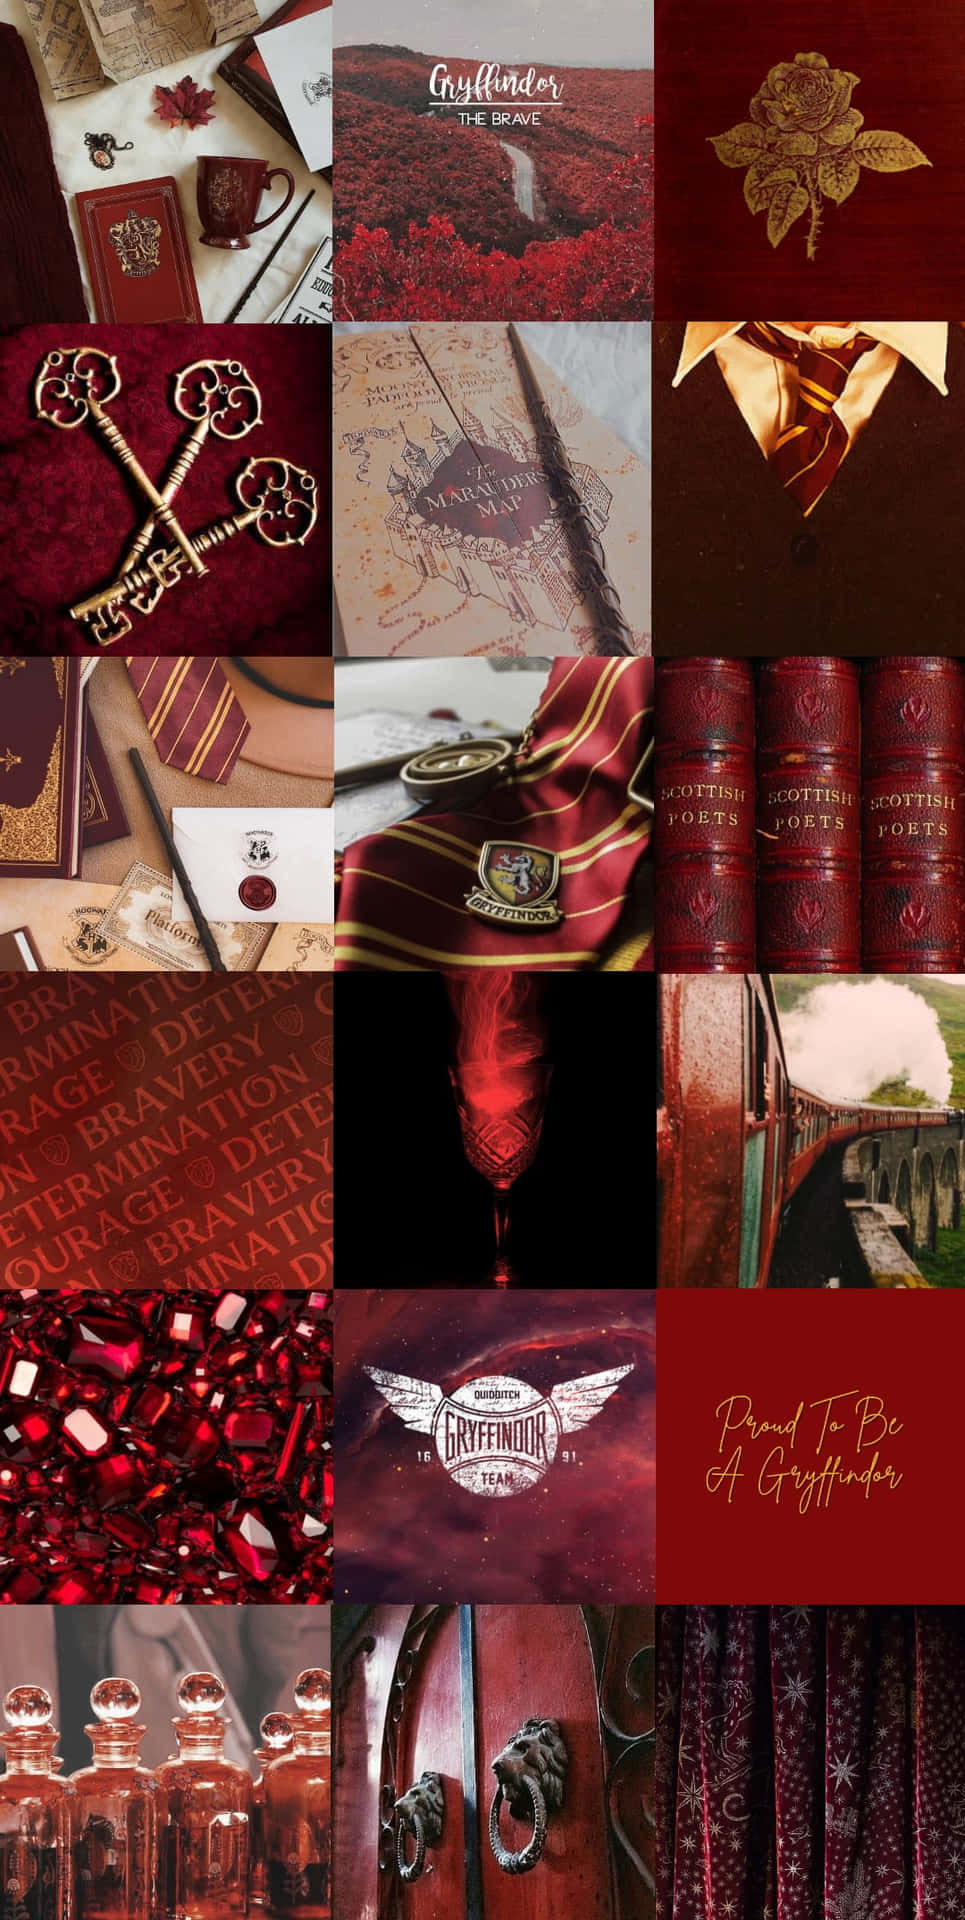 "Welcome to Gryffindor House - Where bravery comes first." Wallpaper